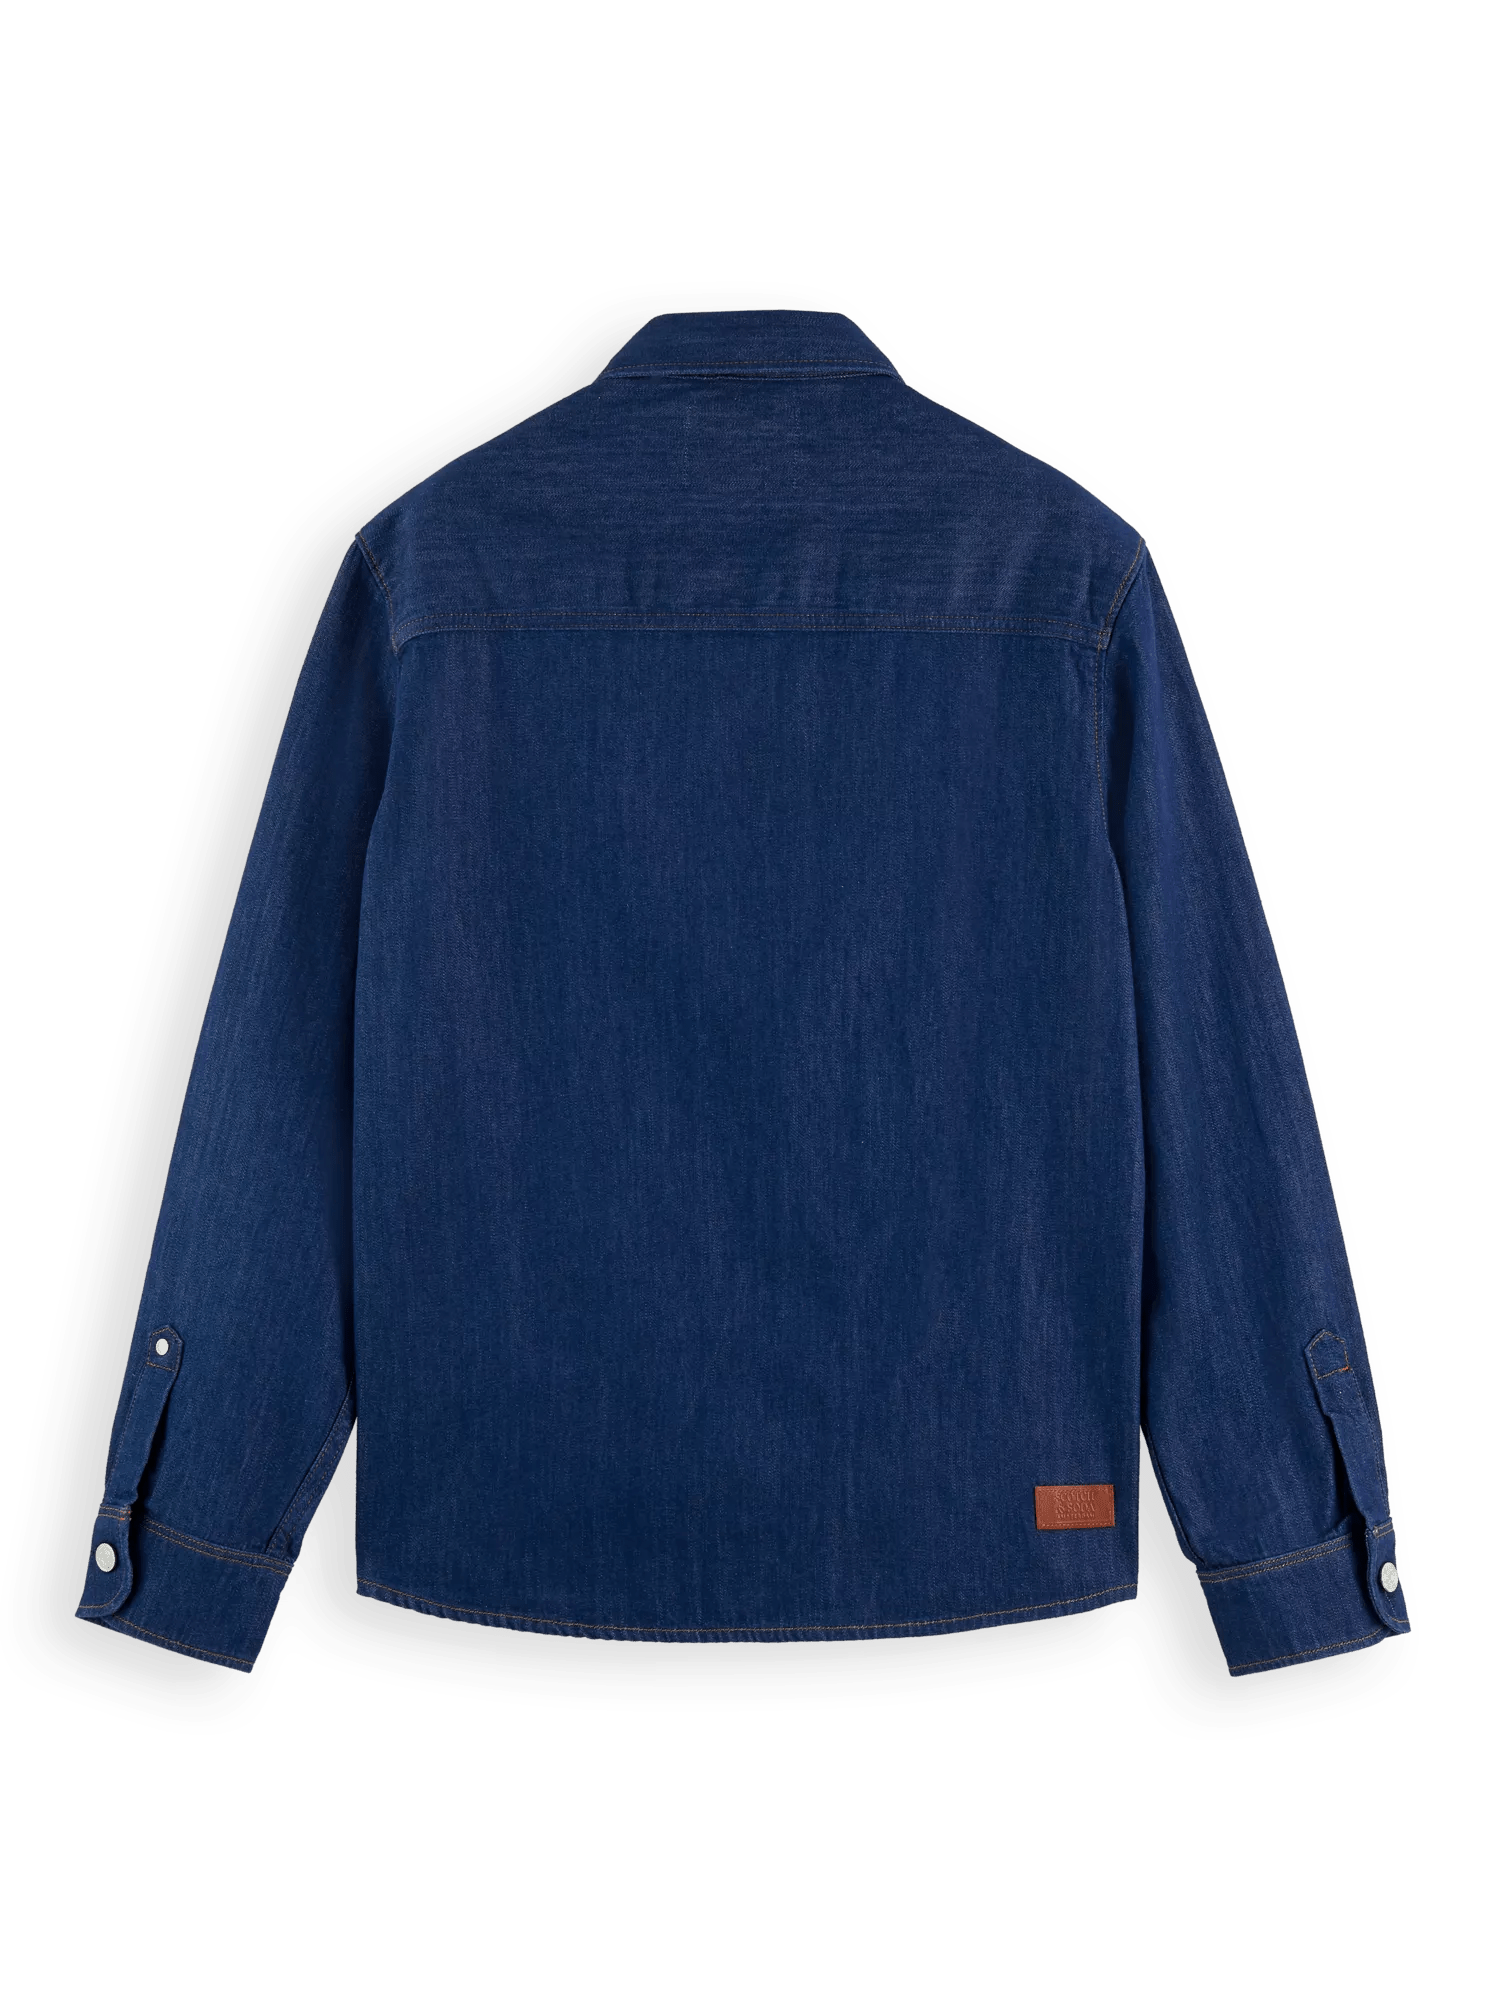 Scotch & Soda Denim overshirt with contrast panelling BCK